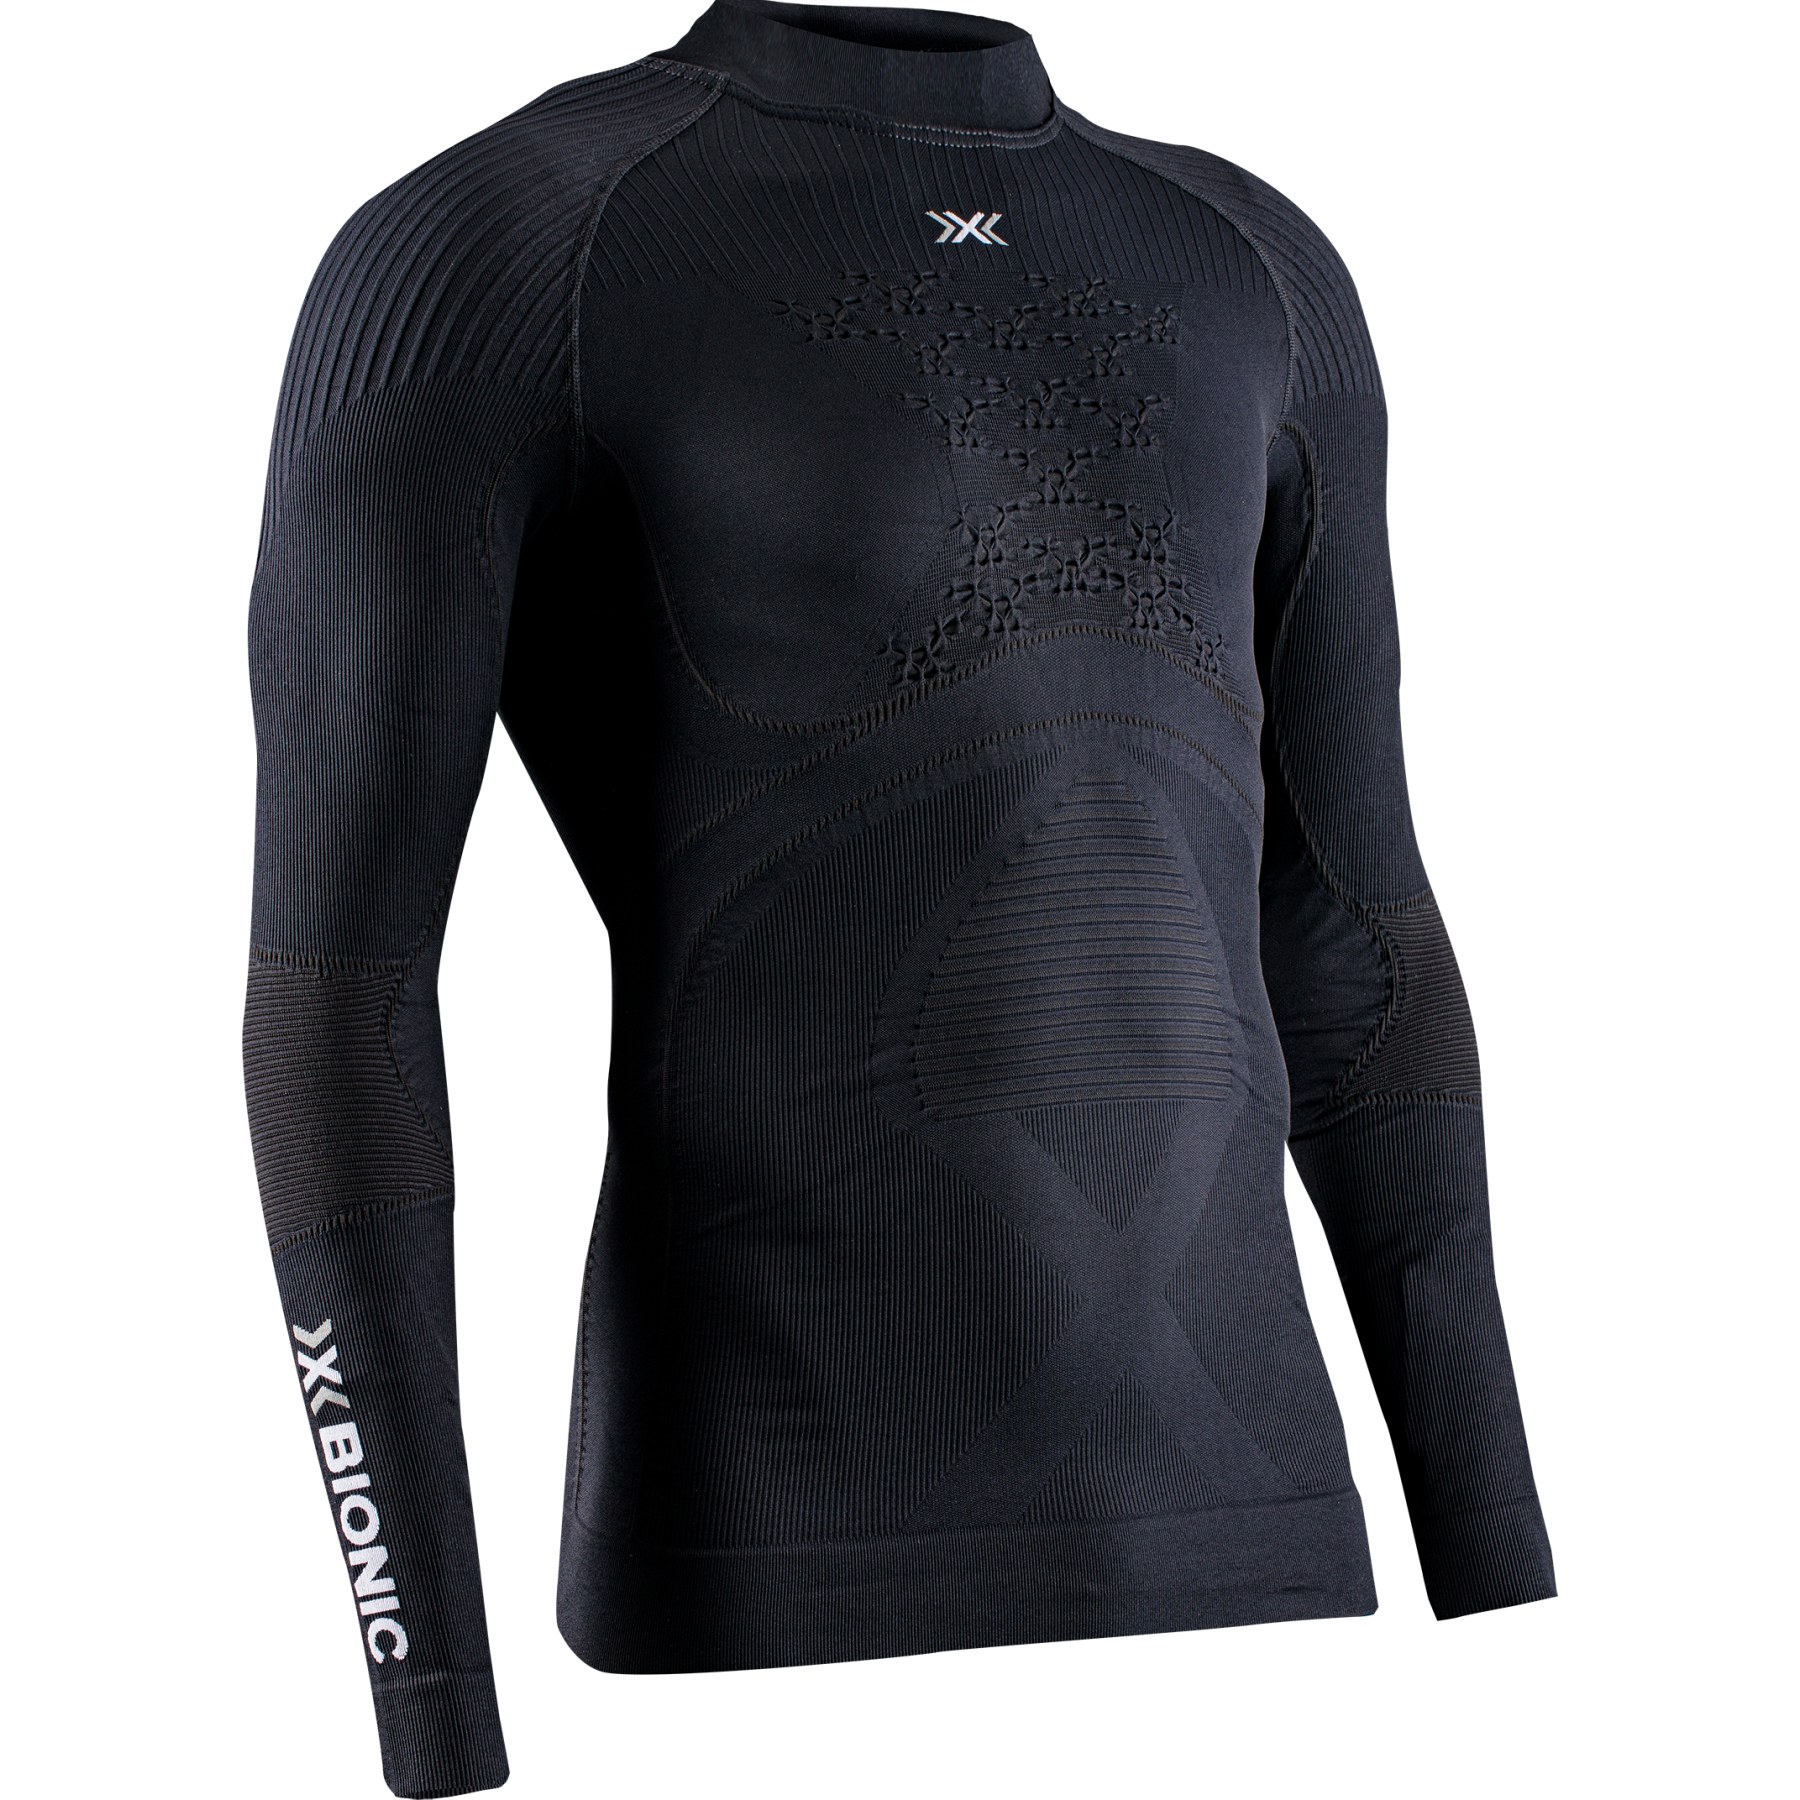 Picture of X-Bionic Energy Accumulator 4.0 Turtle Neck Long Sleeves Shirt - opal black/arctic white